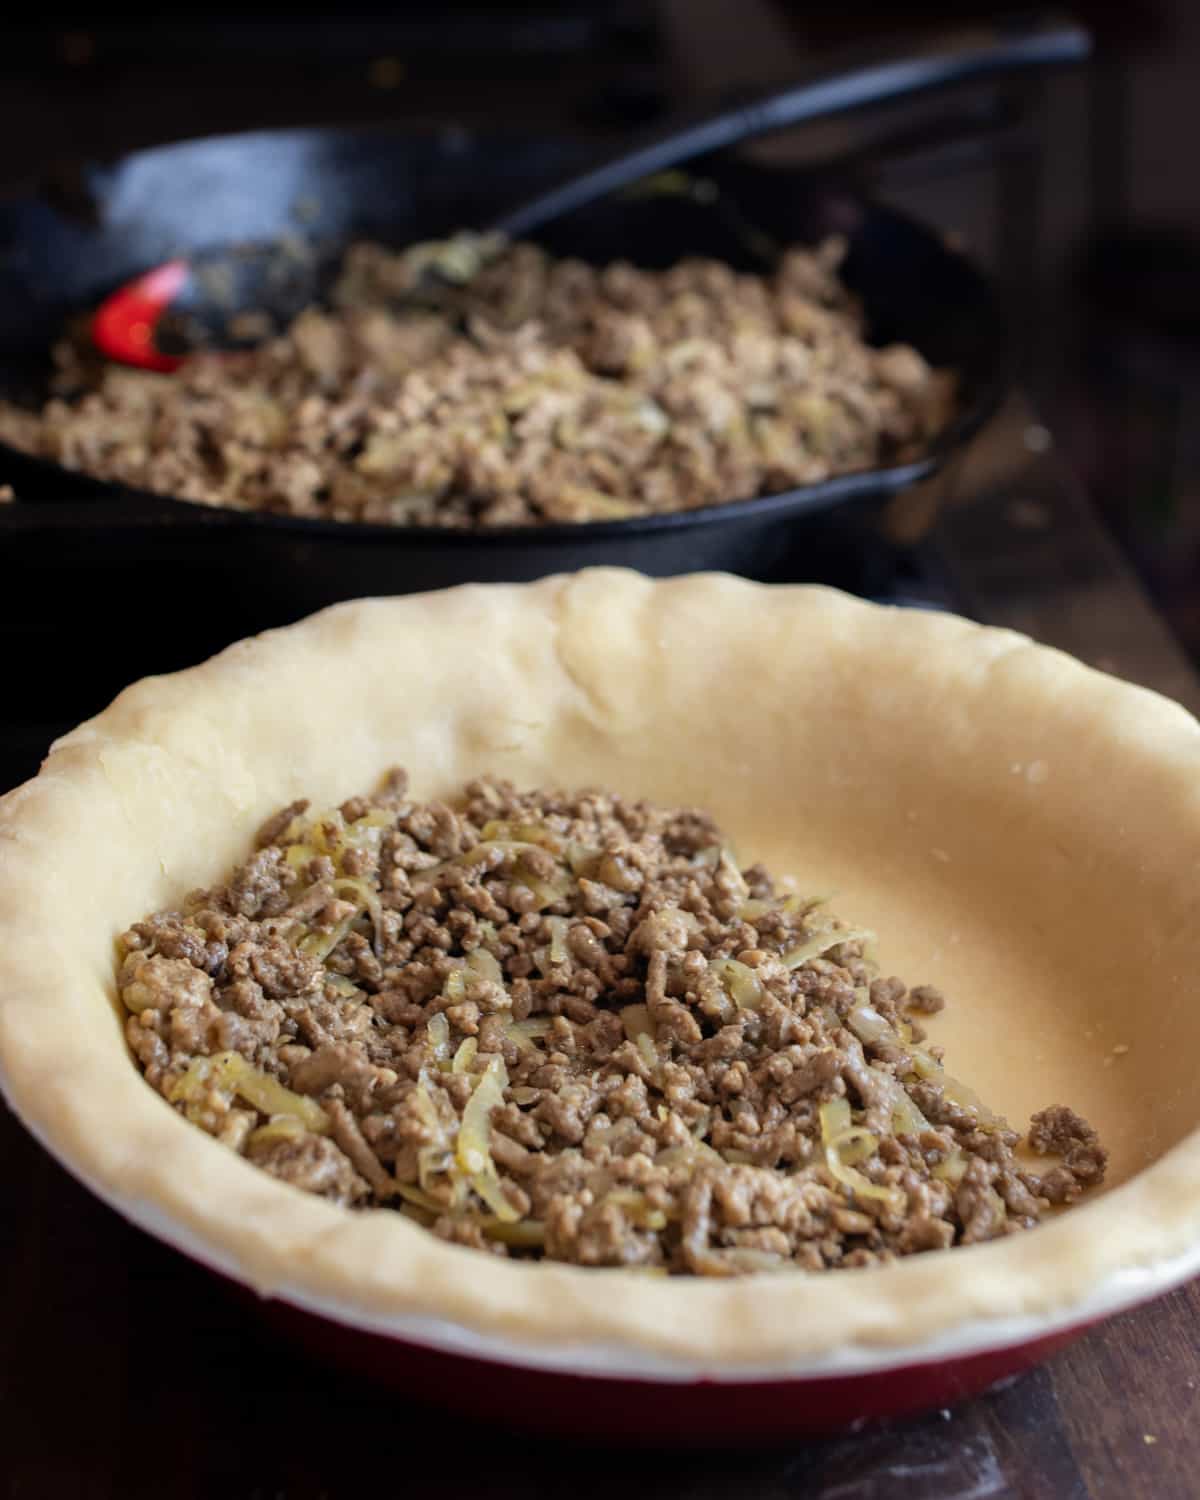 Meat filling being added to a raw pie shell.